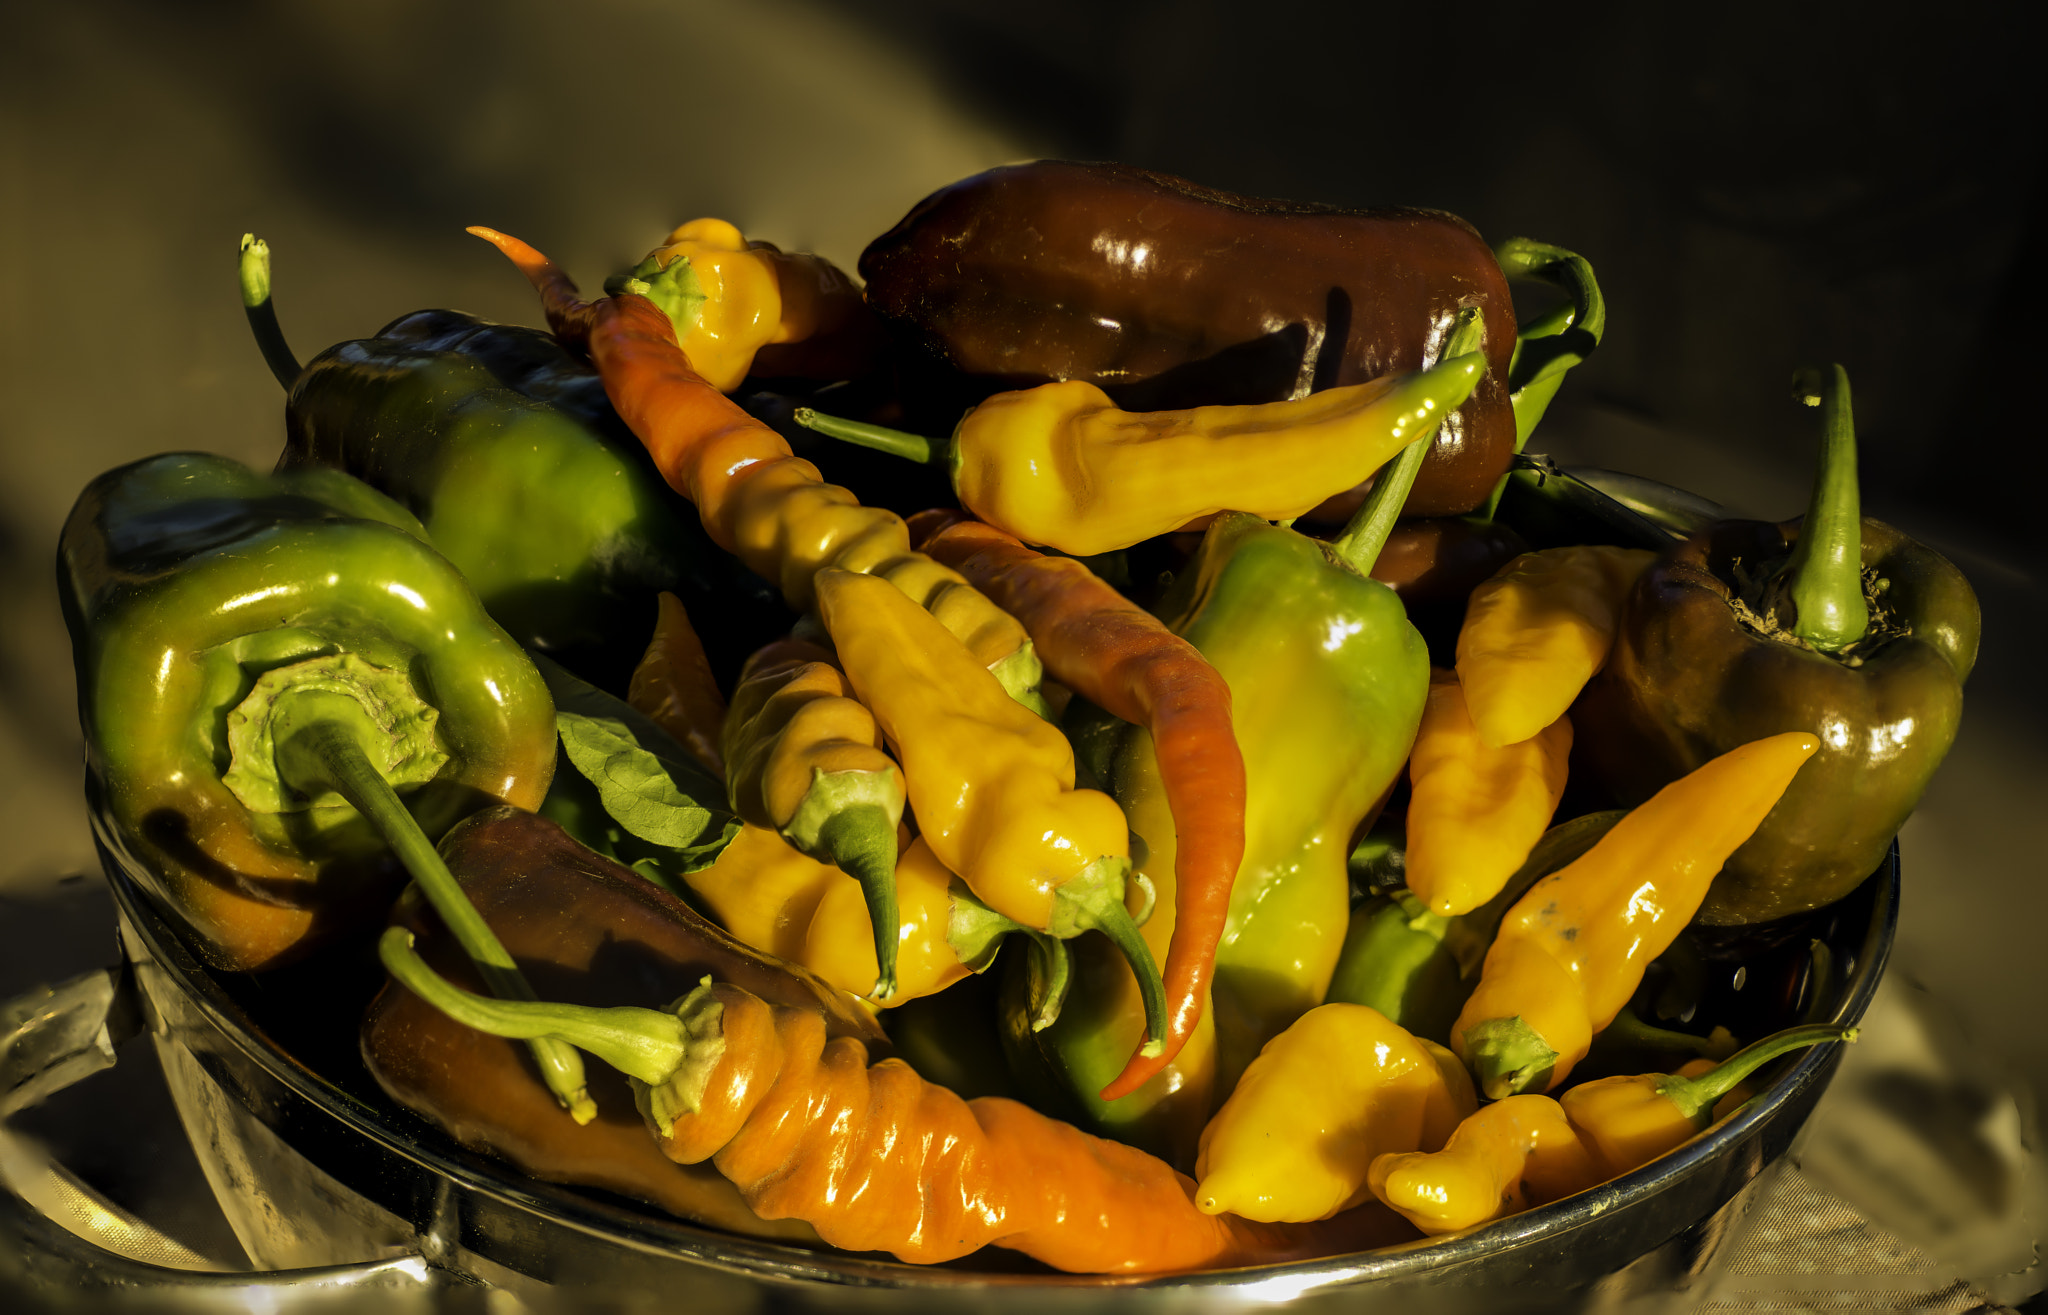 Nikon D800 sample photo. Chili peppers from my garden photography